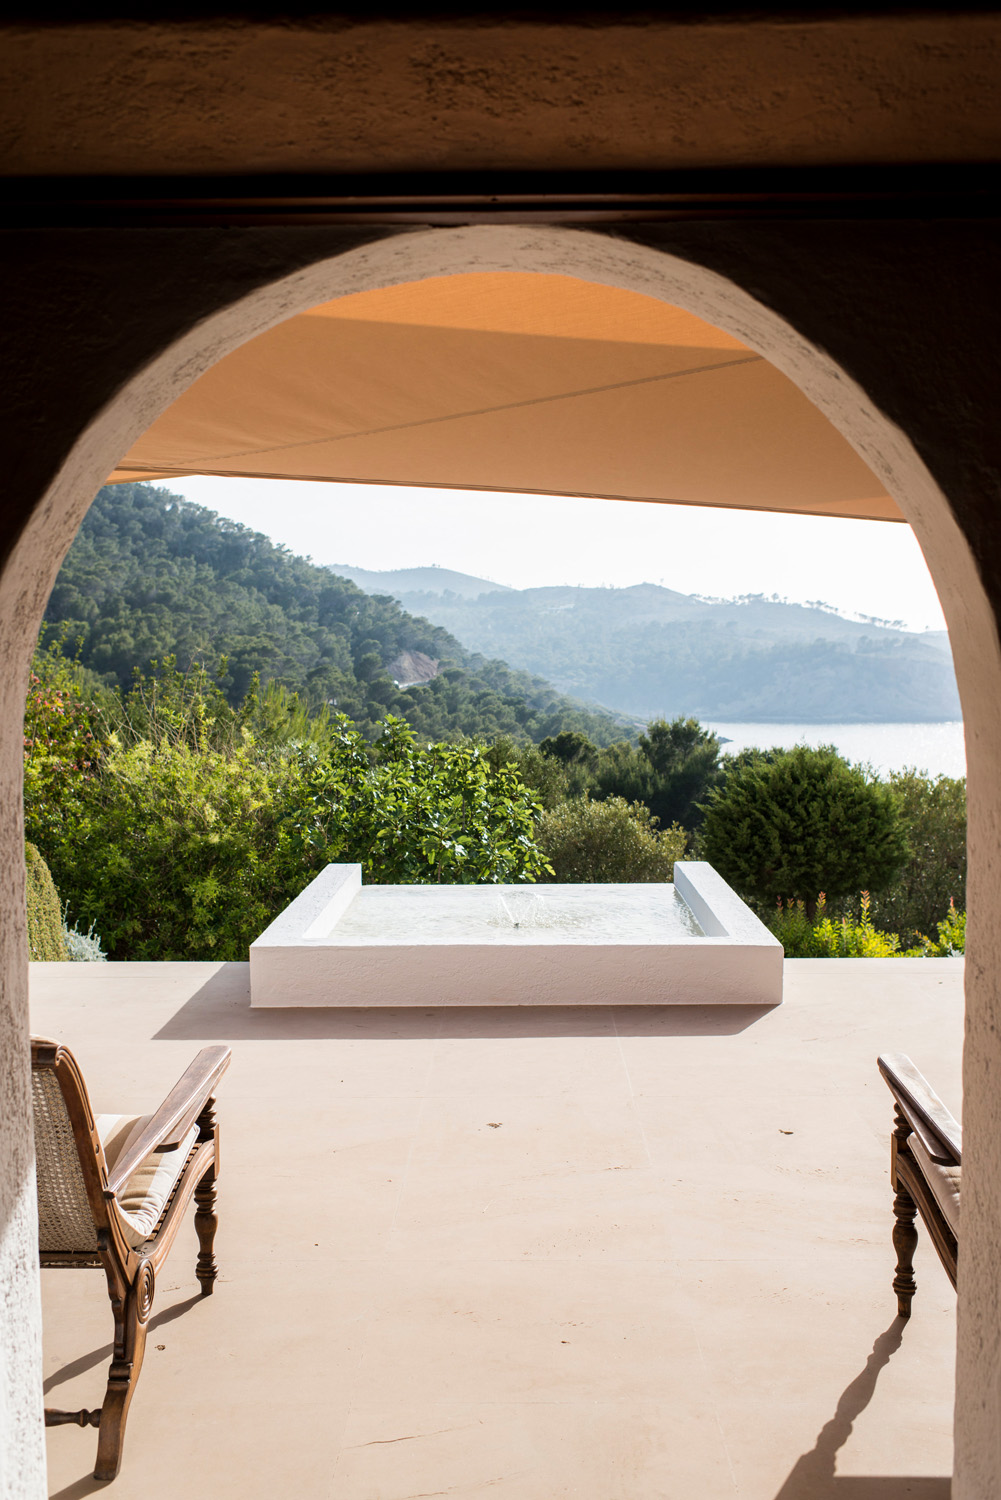 View through an archway and out to the exterior of a luxury villa in Ibiza